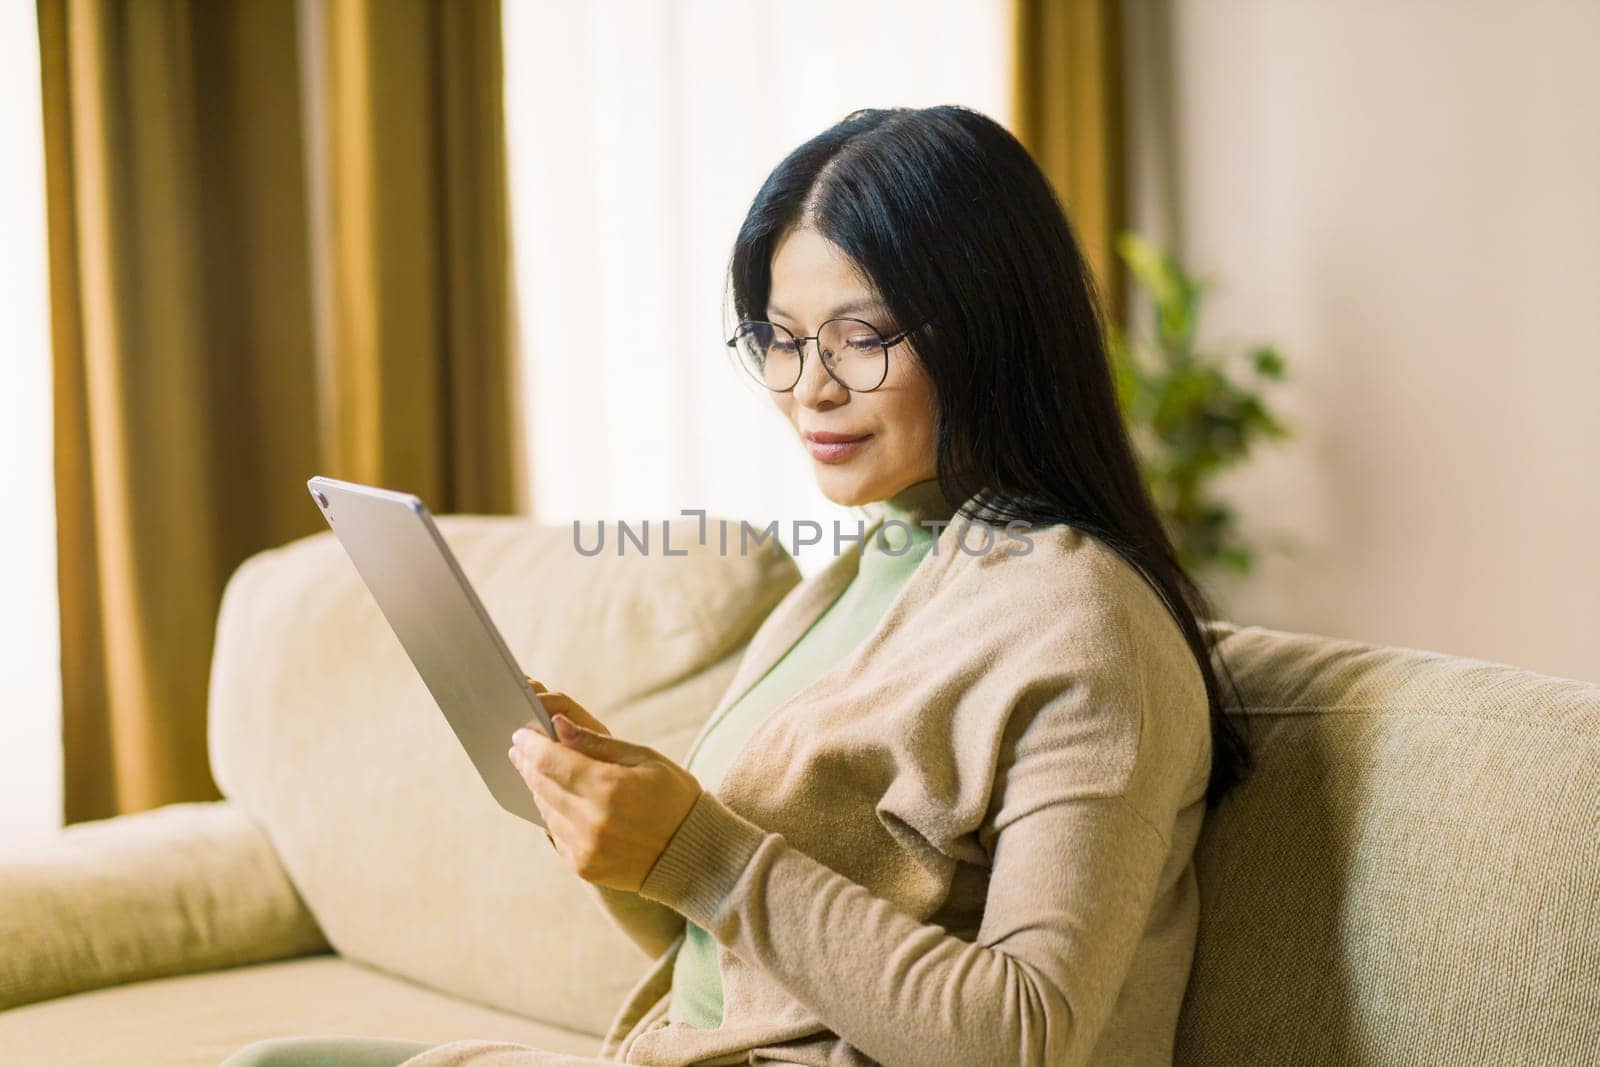 Mature Asian woman wearing glasses is deeply focused on browsing internet on her tablet while comfortably seated in the interior of her home. High quality photo